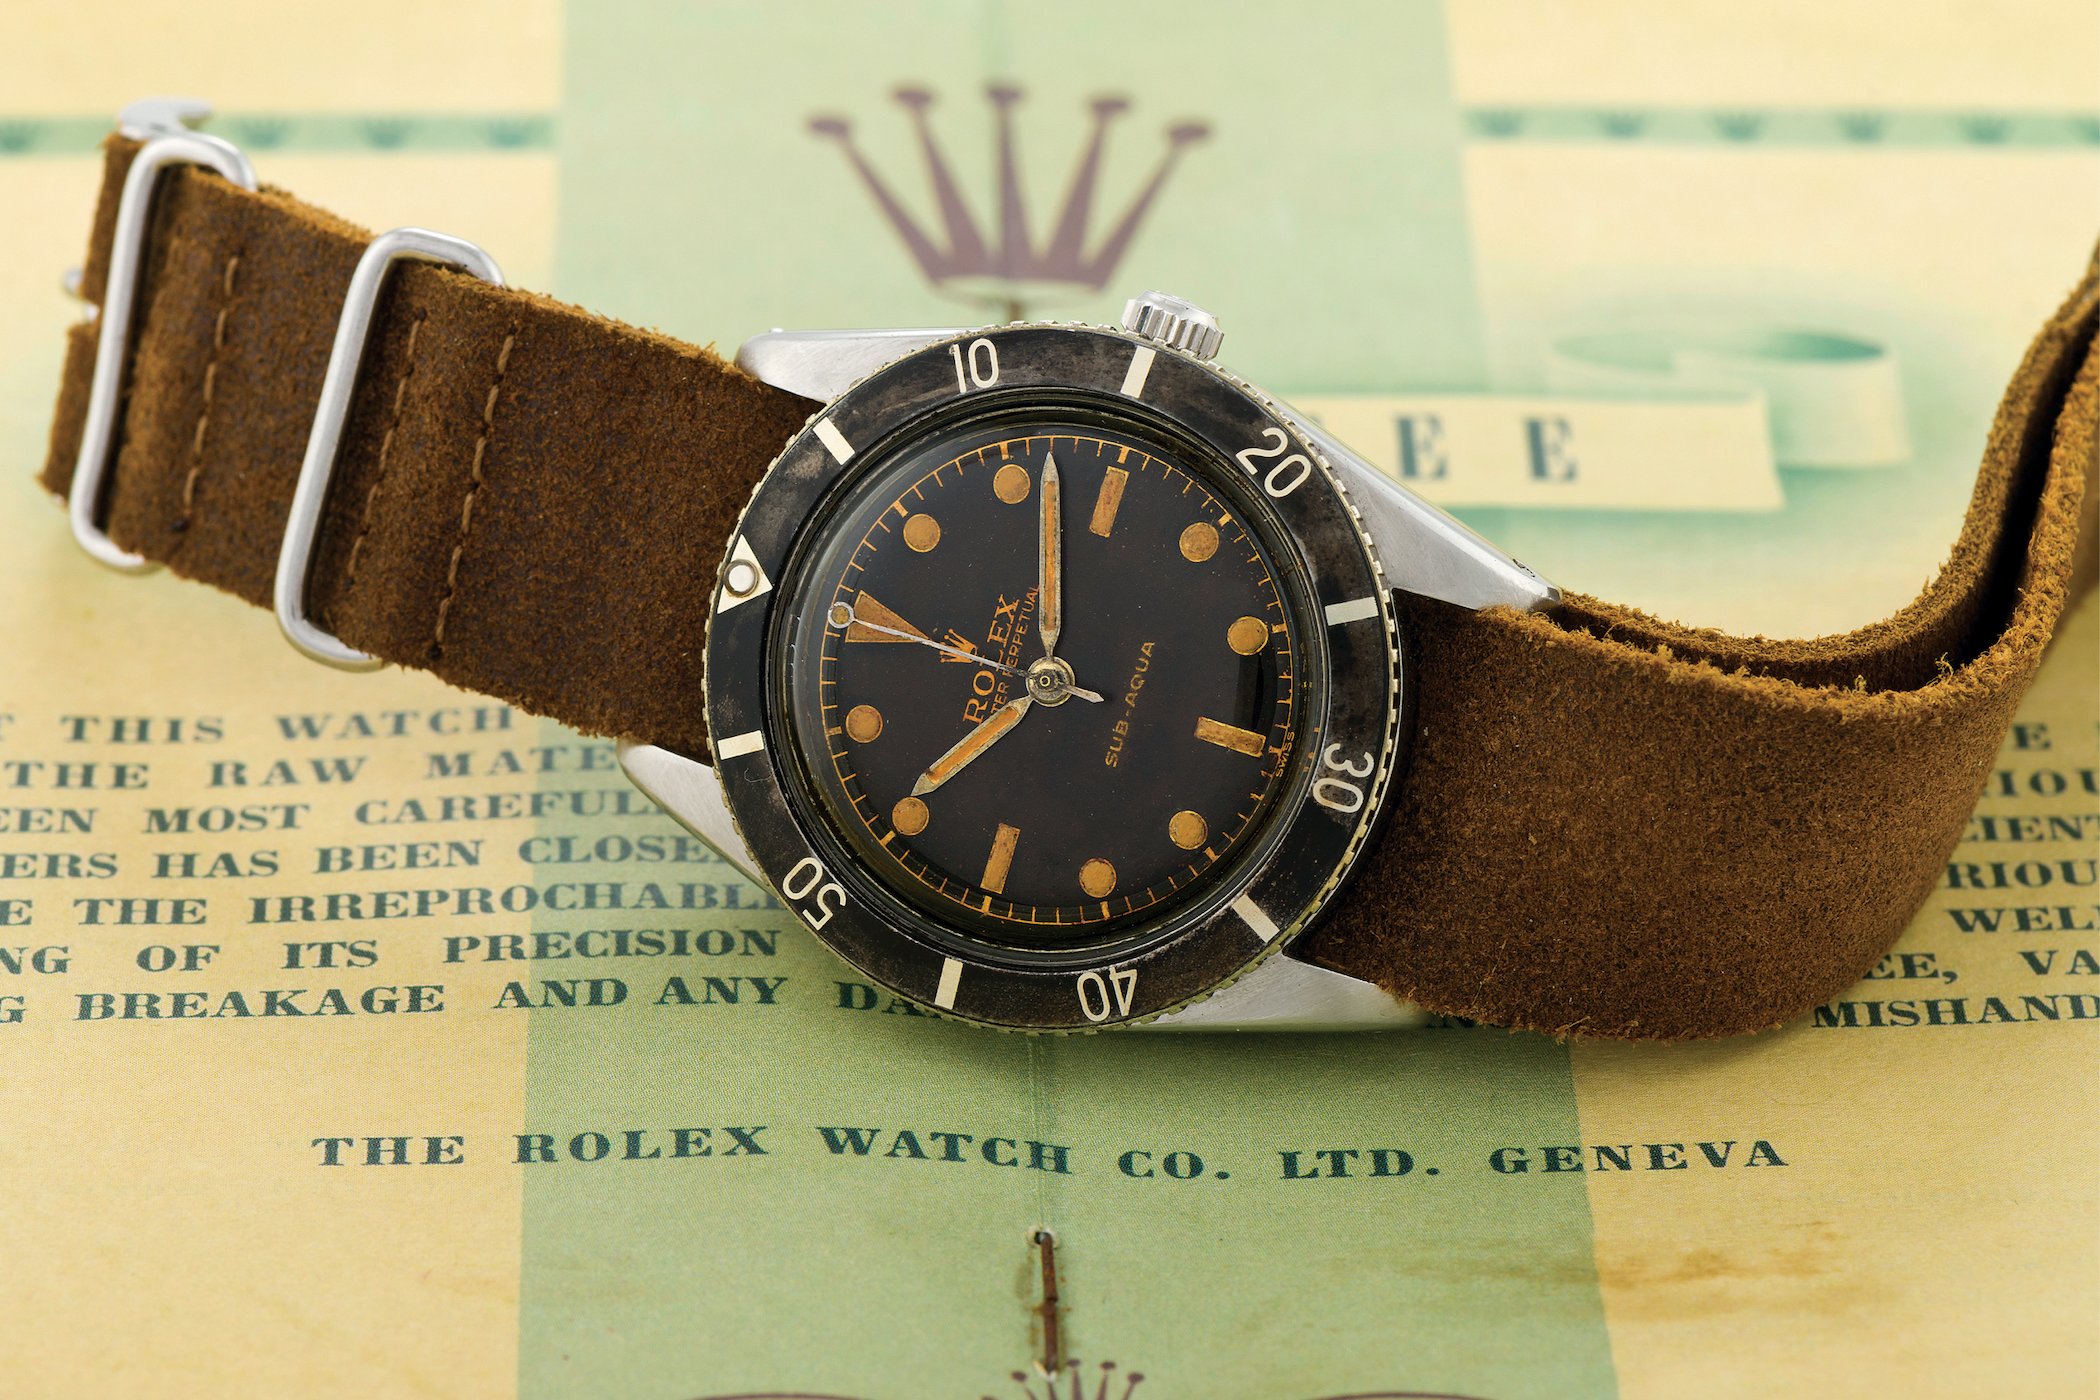 Rolex Submariner: A Quick History of the Iconic Divers Watch